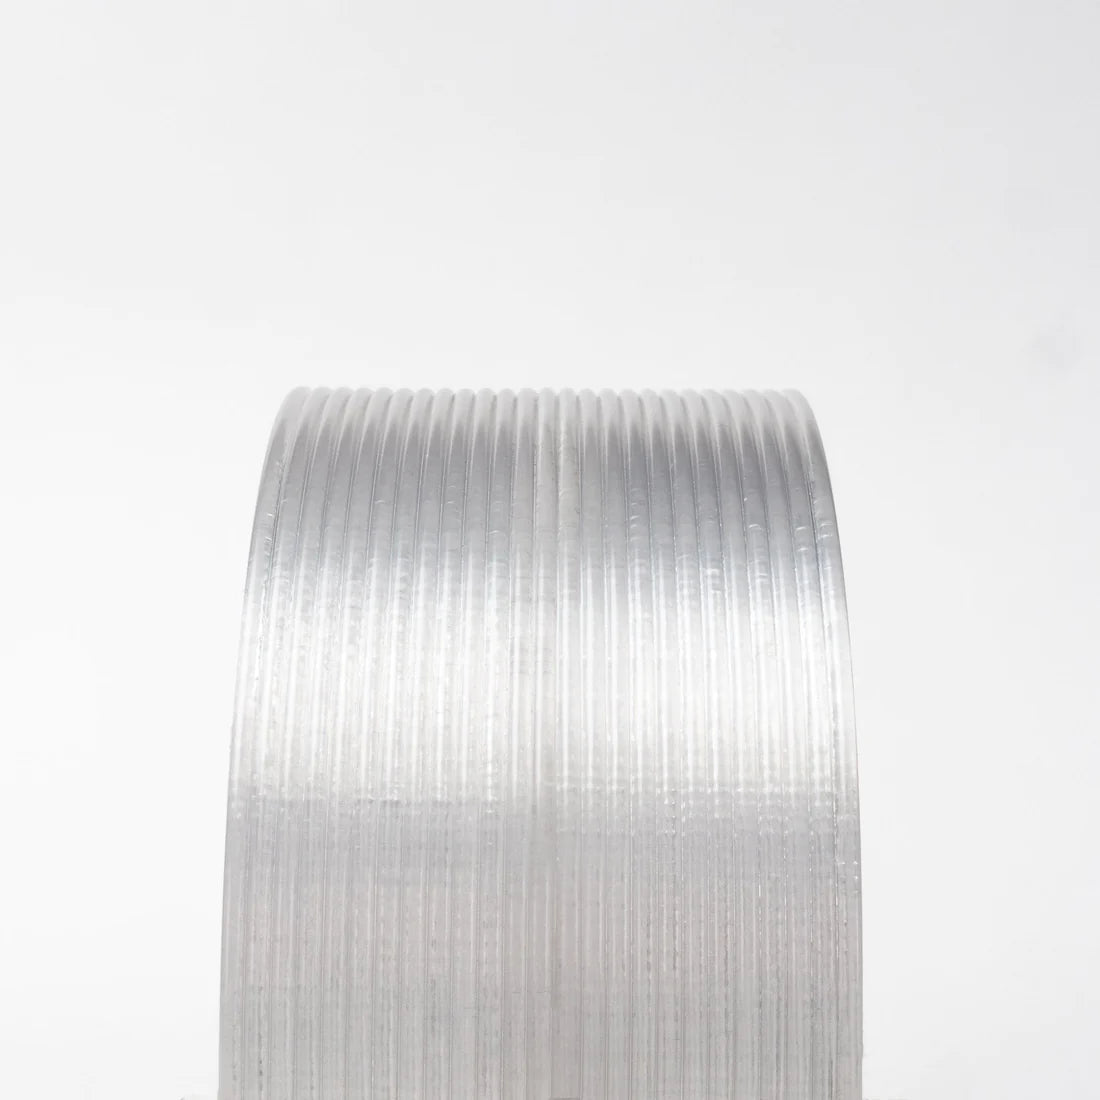 ProtoPasta Simply Clear PETG (75% recycled!) 1KG and 50G sizes - West3D Printing - ProtoPasta